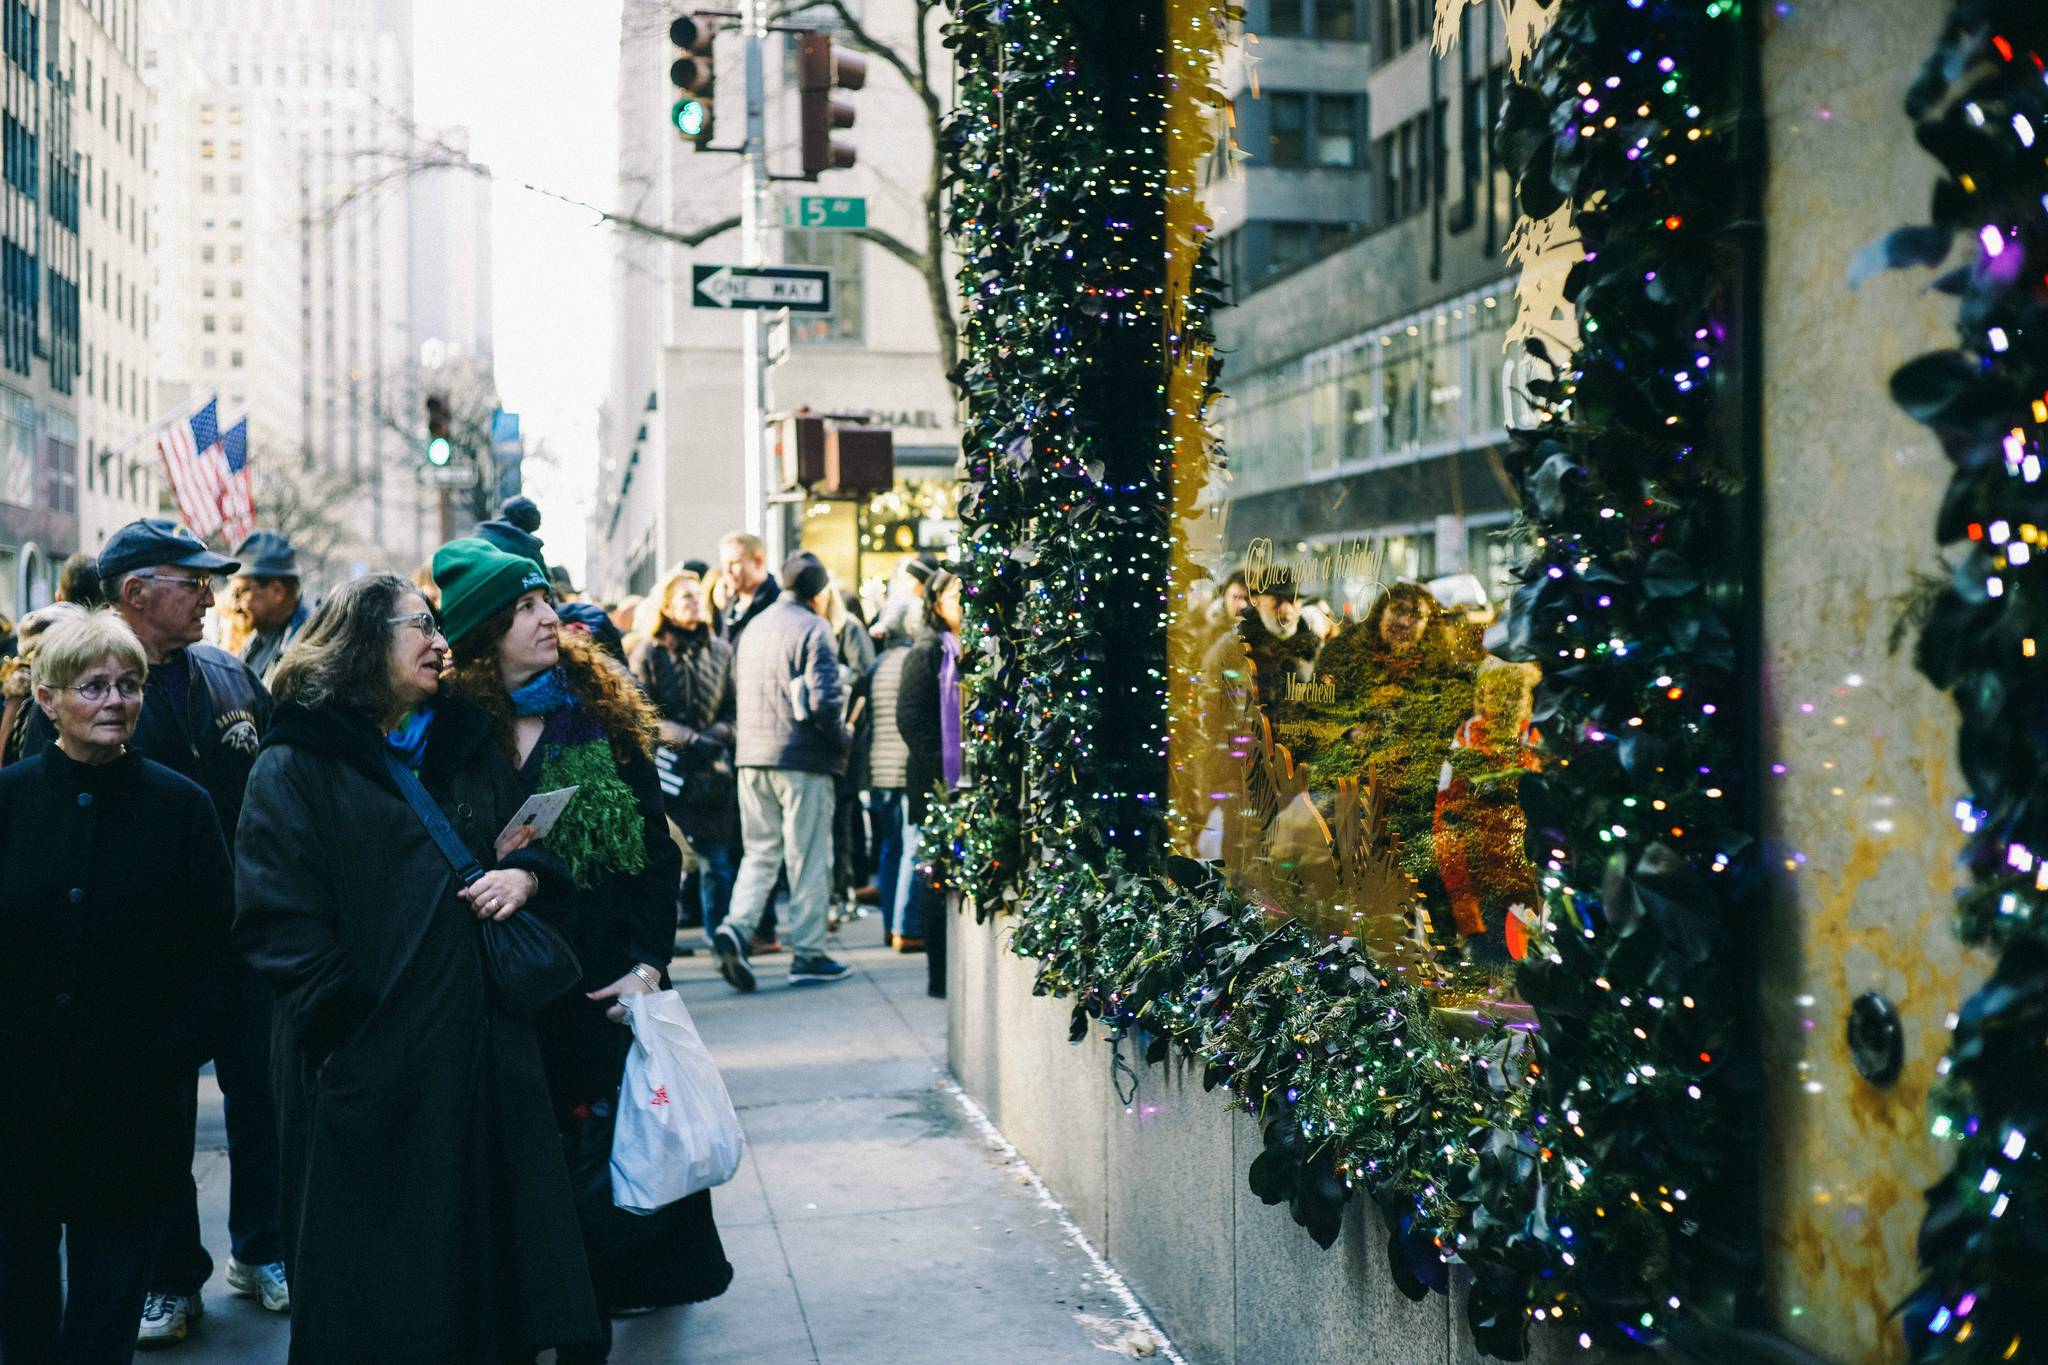 What causes Americans stress over Christmas?